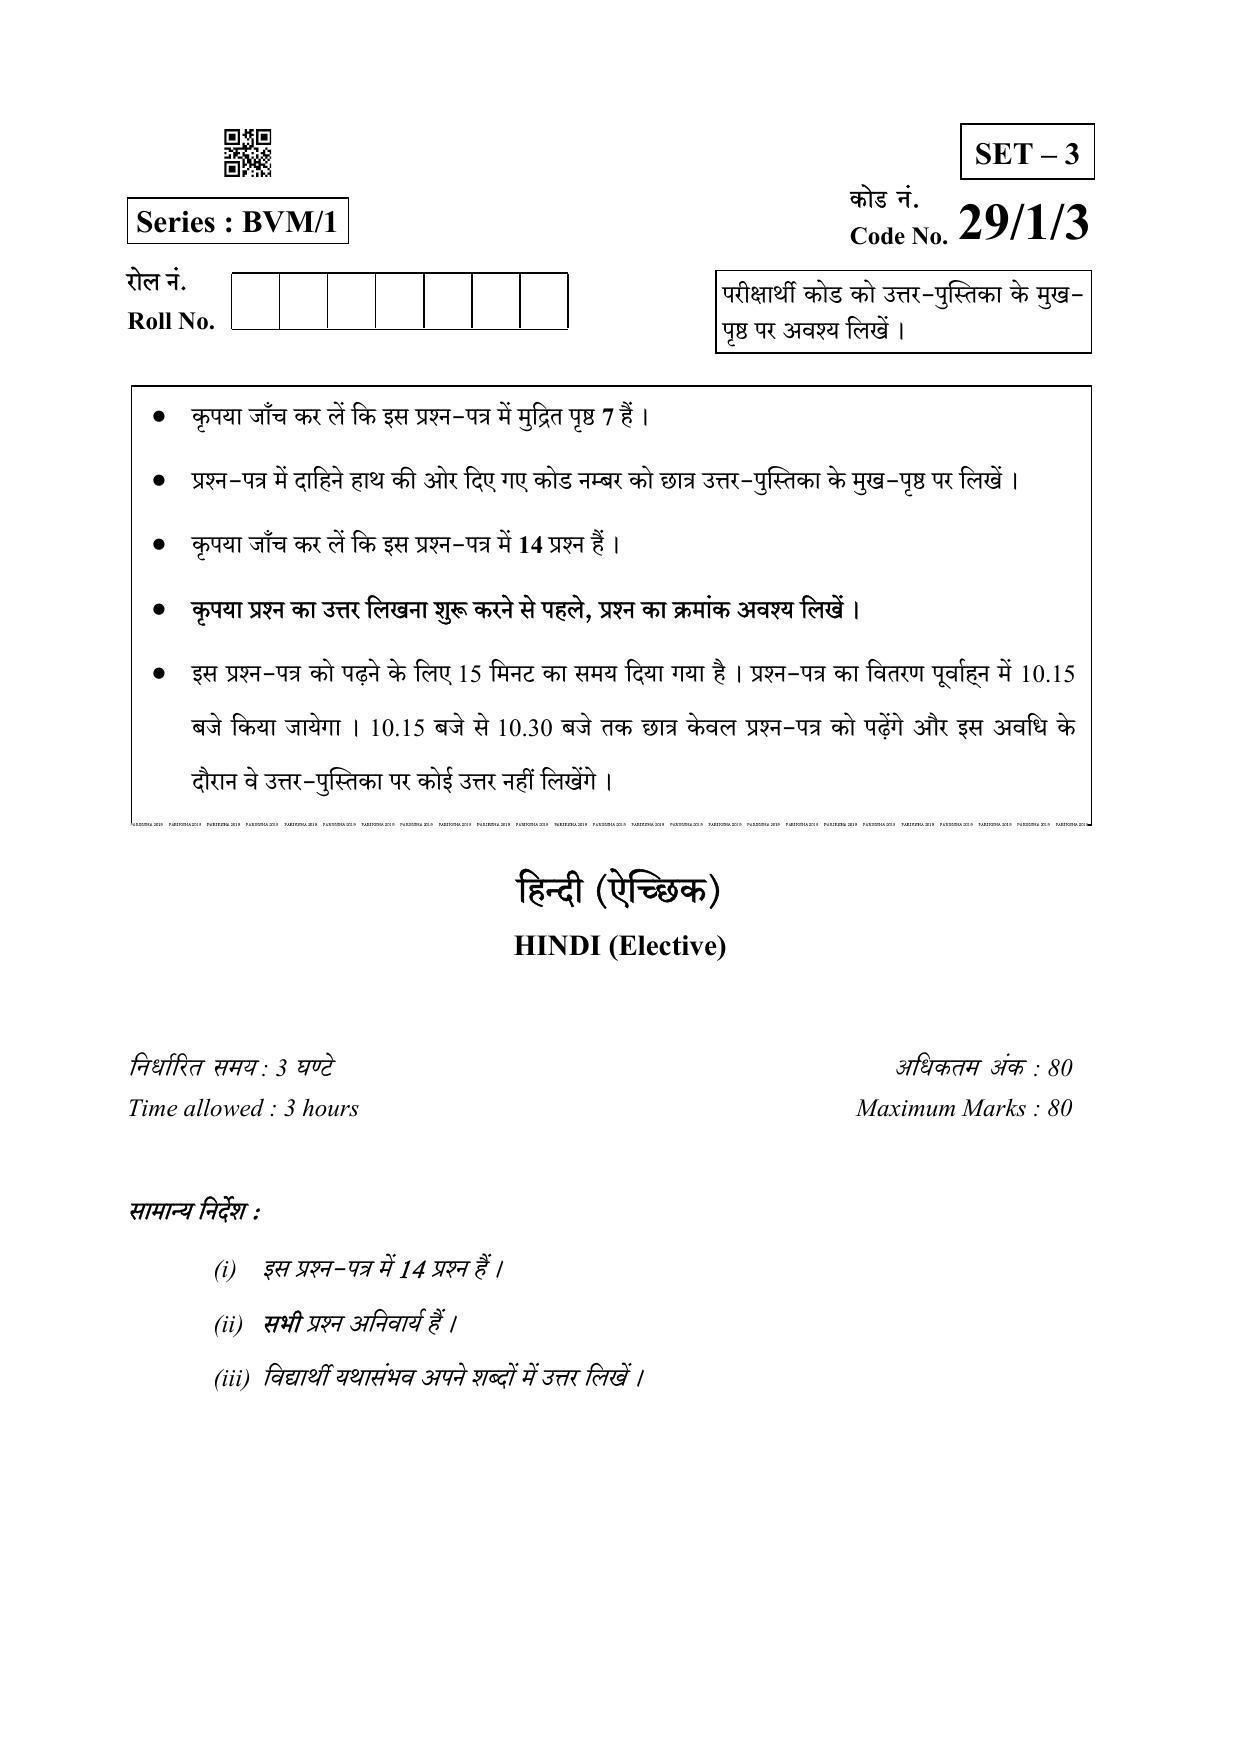 CBSE Class 12 29-1-3 (Hindi ELECTIVE) 2019 Question Paper - Page 1